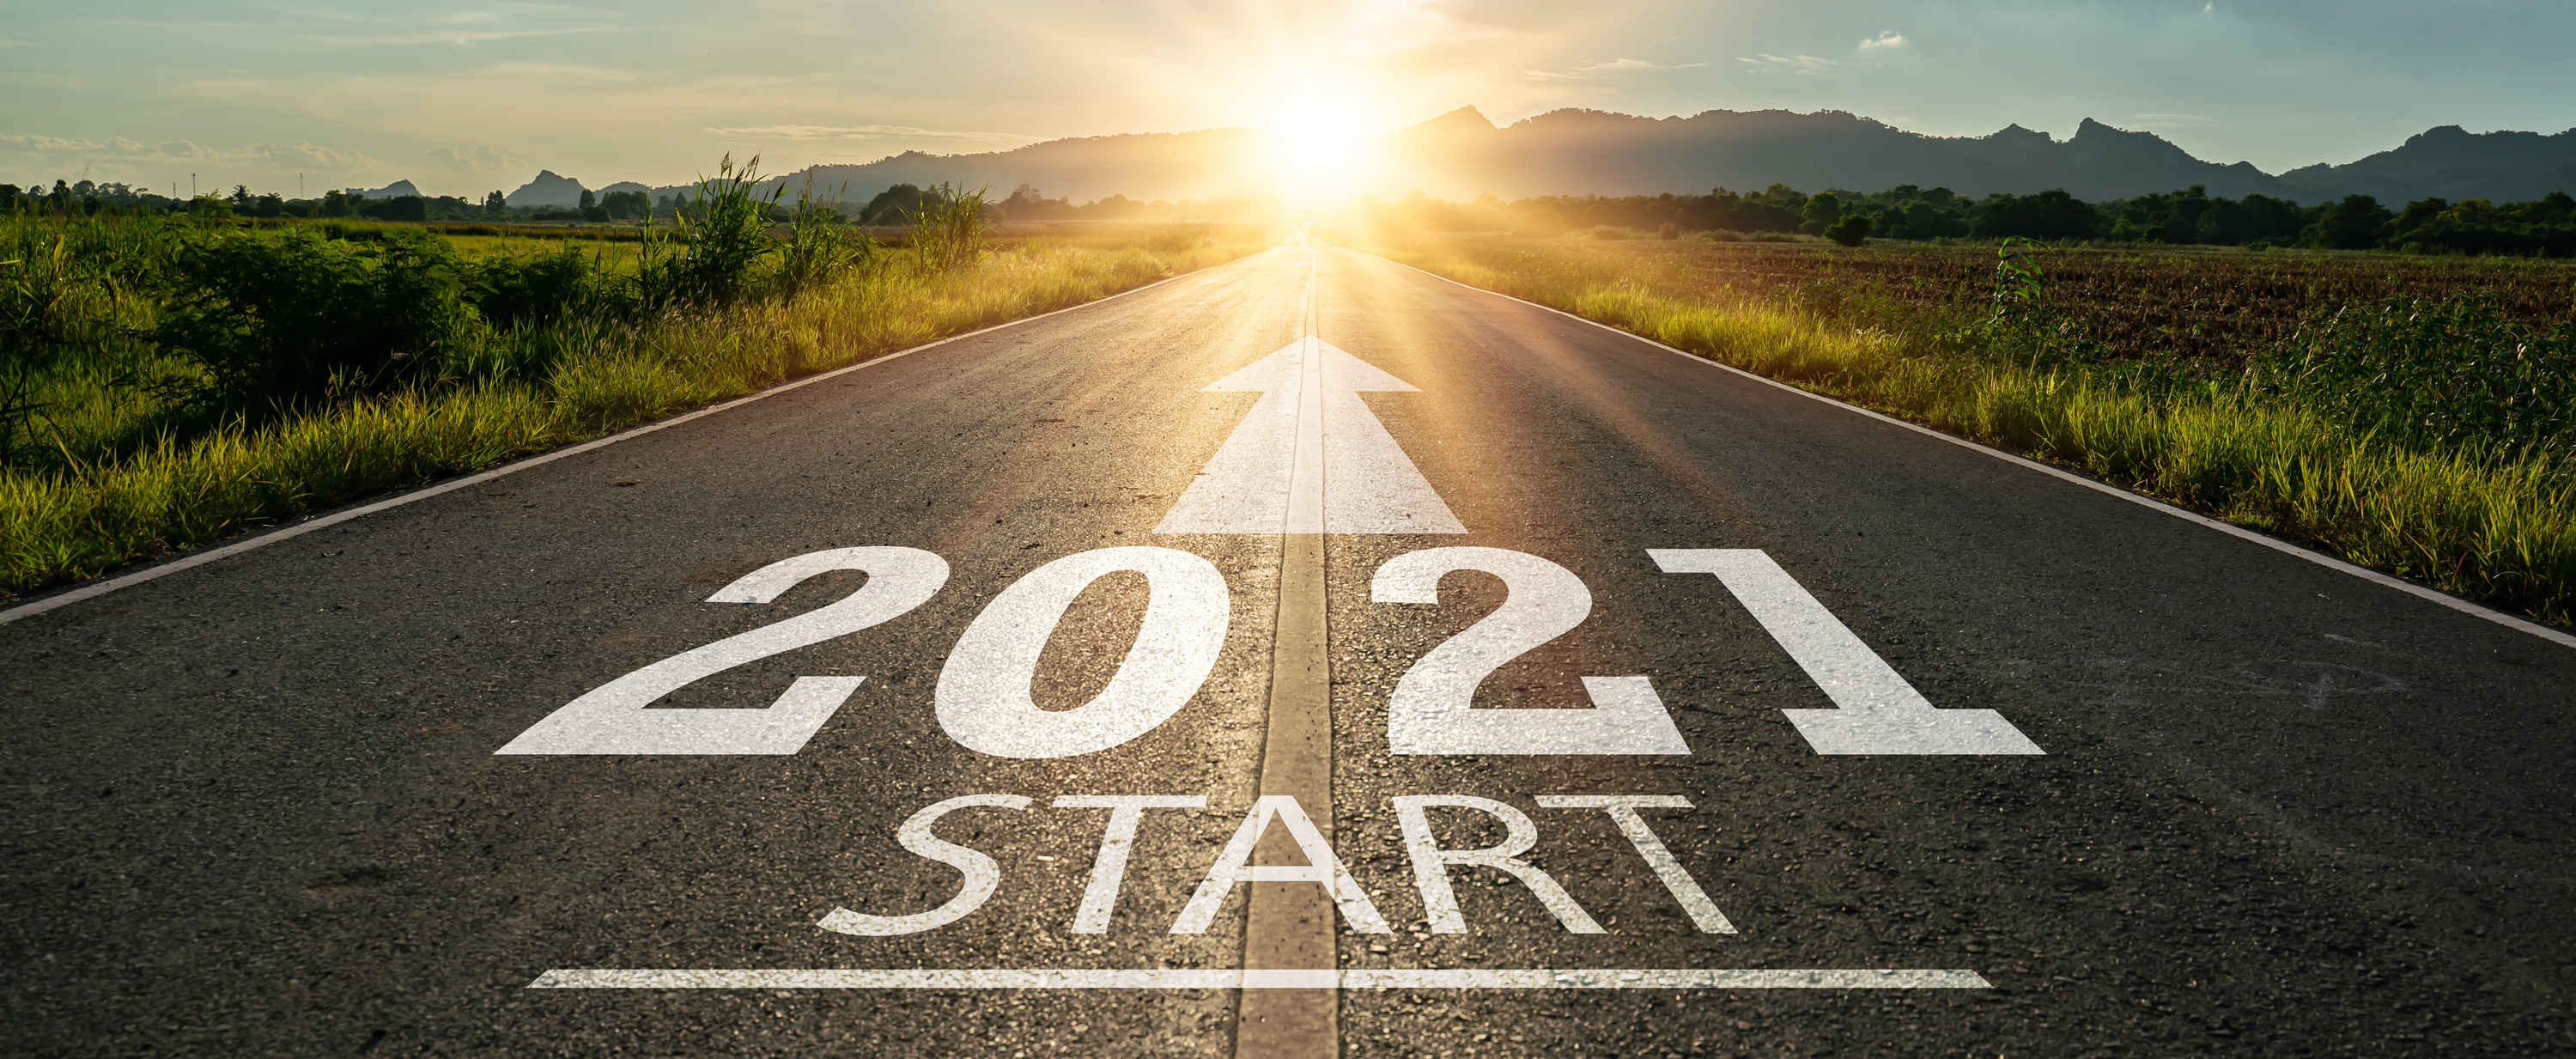 2021 Start: An empty road with the words "2021 start" written on it, symbolizing the beginning of a new year and new opportunities.